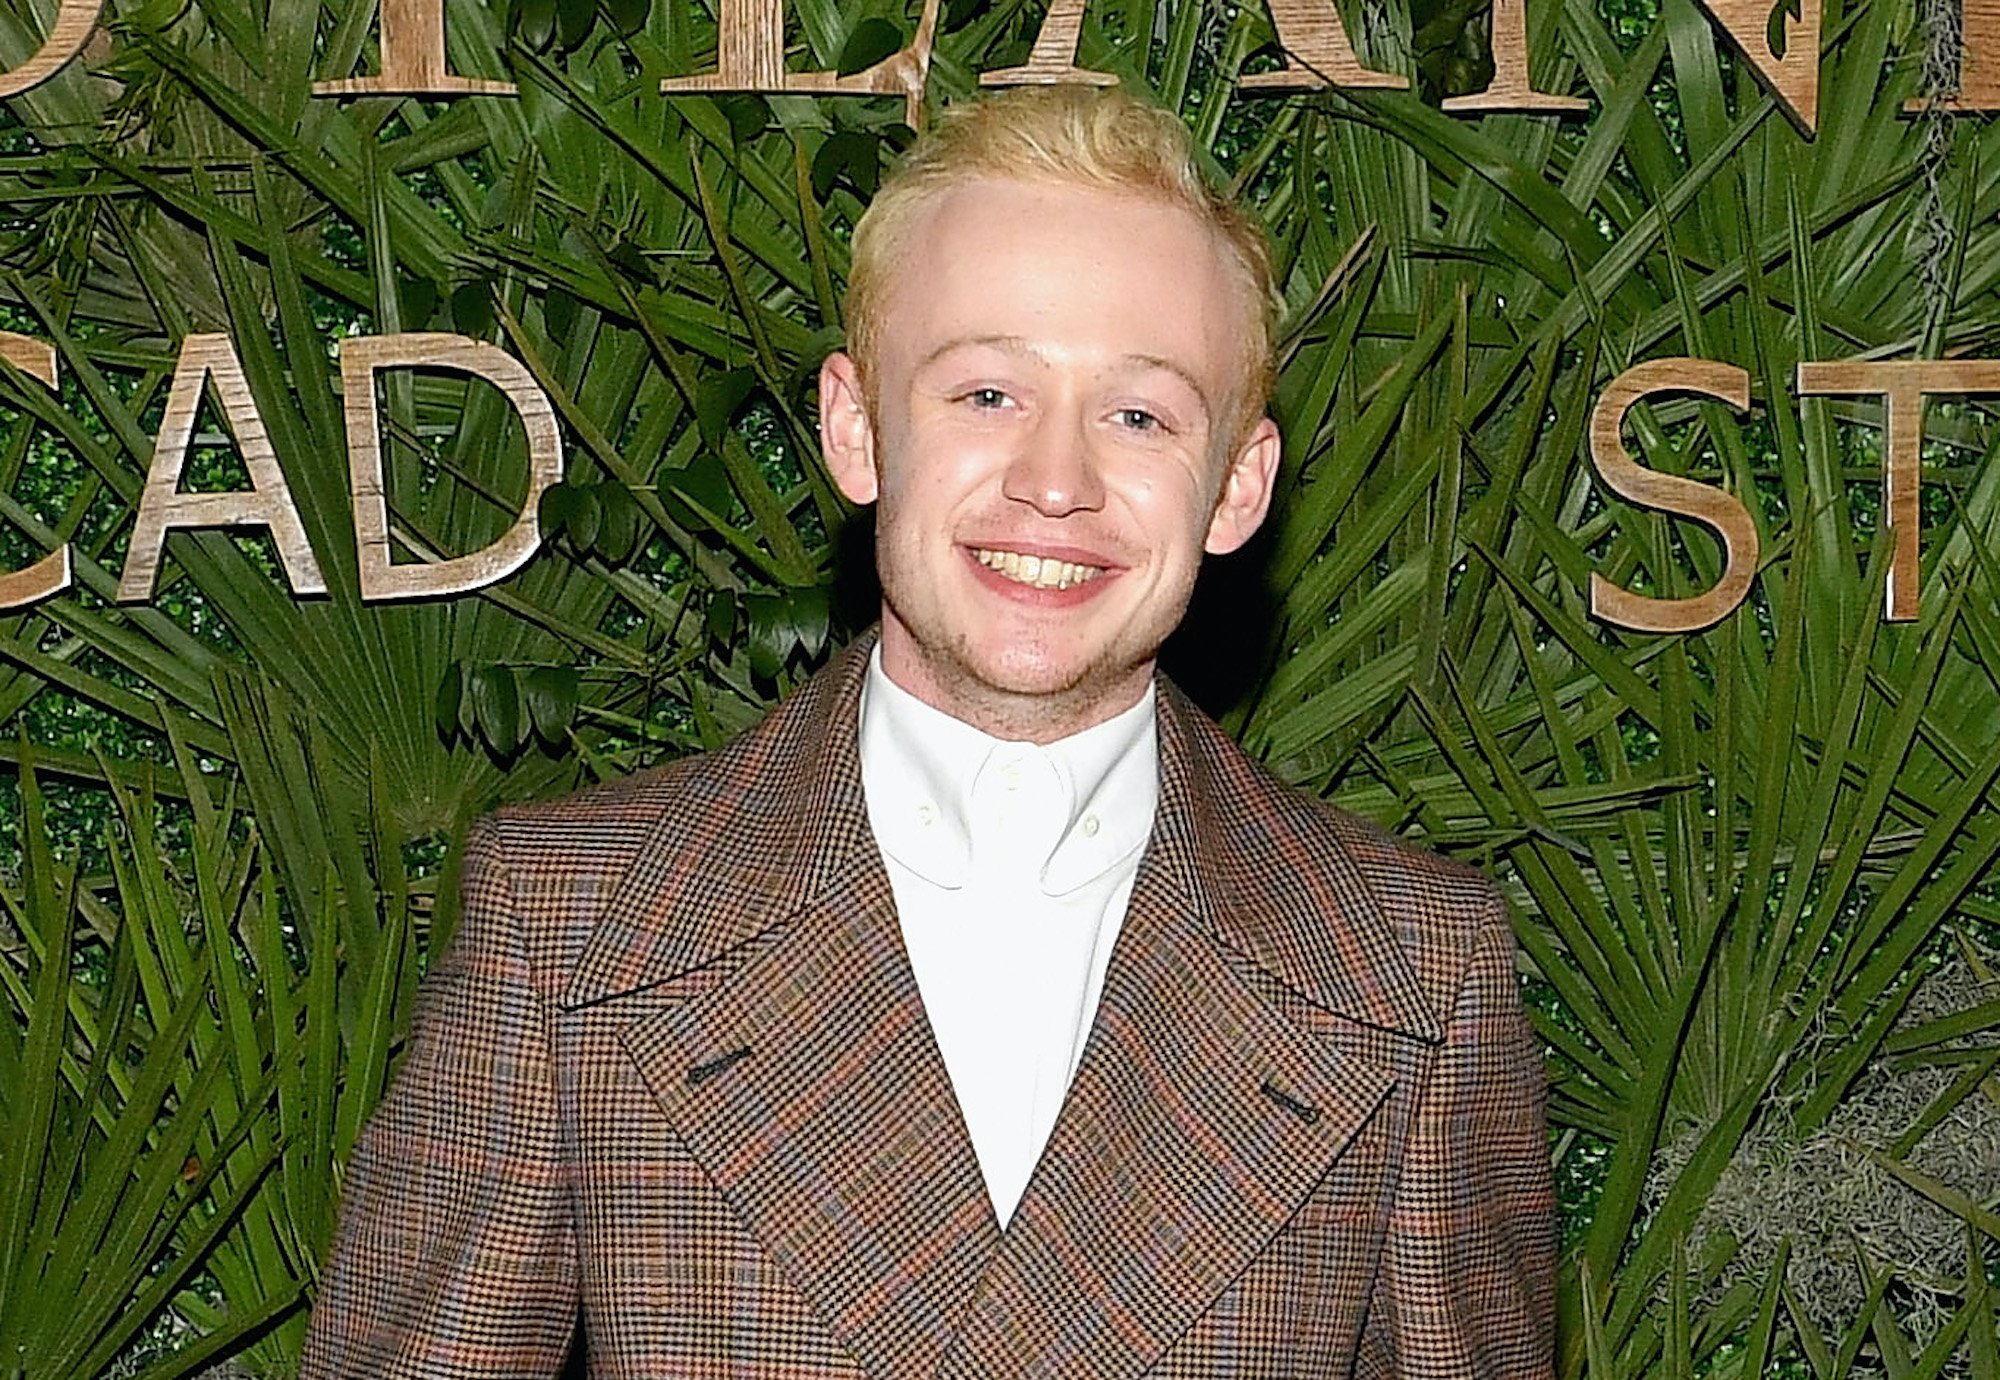 'Outlander' actor John Bell attends the 21st SCAD Savannah Film Festival on October 28, 2018 in Savannah, Georgia. He stands in a brown checkered suit jacket and navy blue pants and smiles in front of a wall covered in green foliage.